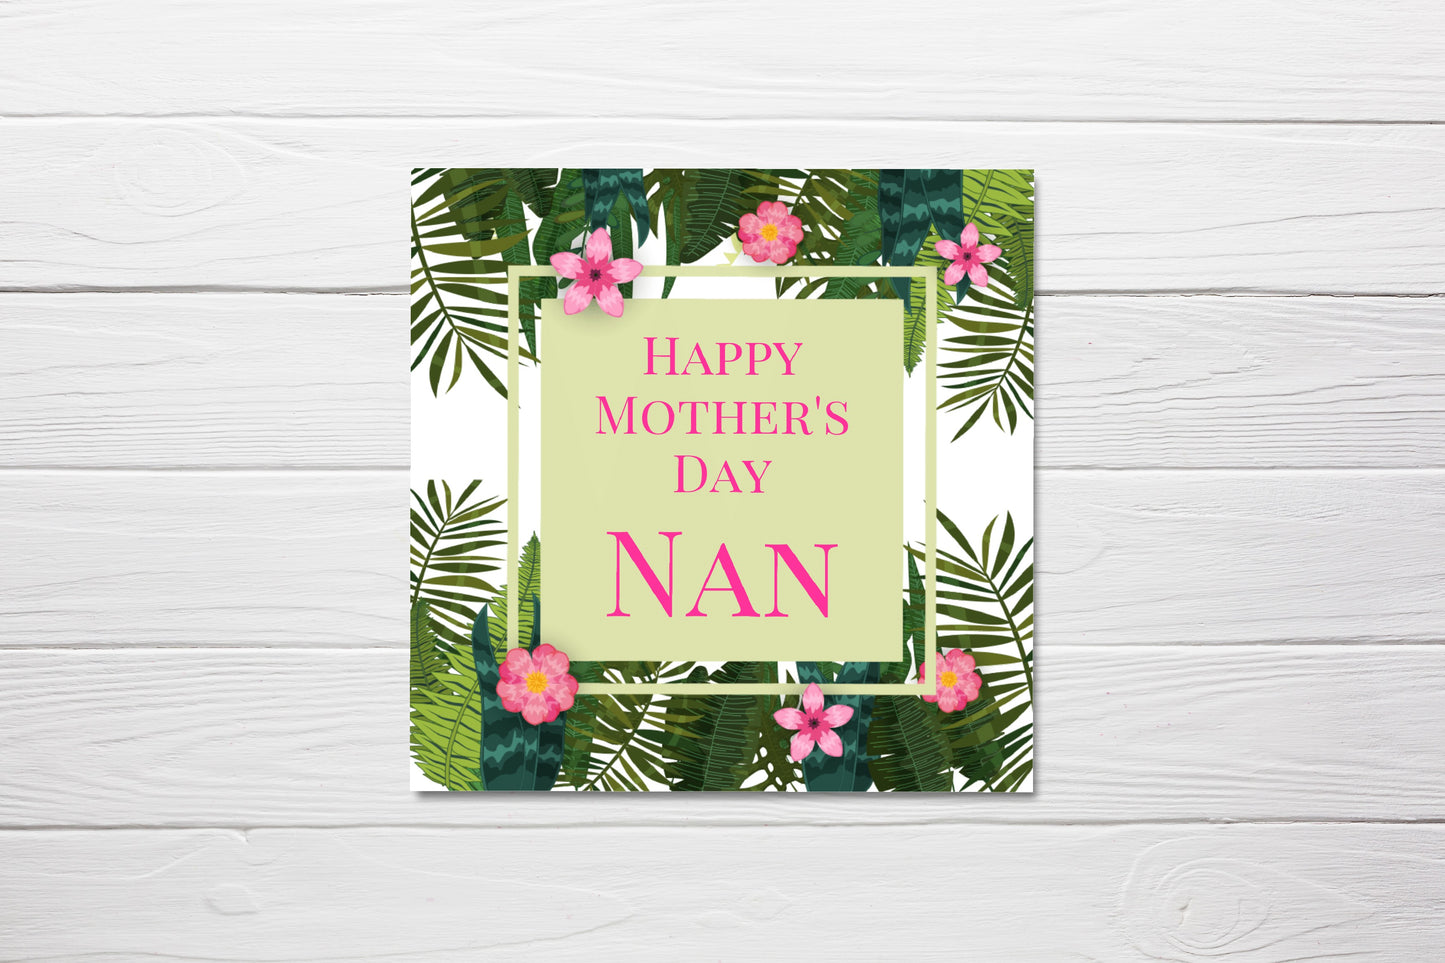 Mother's Day Card | Happy Mother's Day Nan | Tropical Card | Cute Card